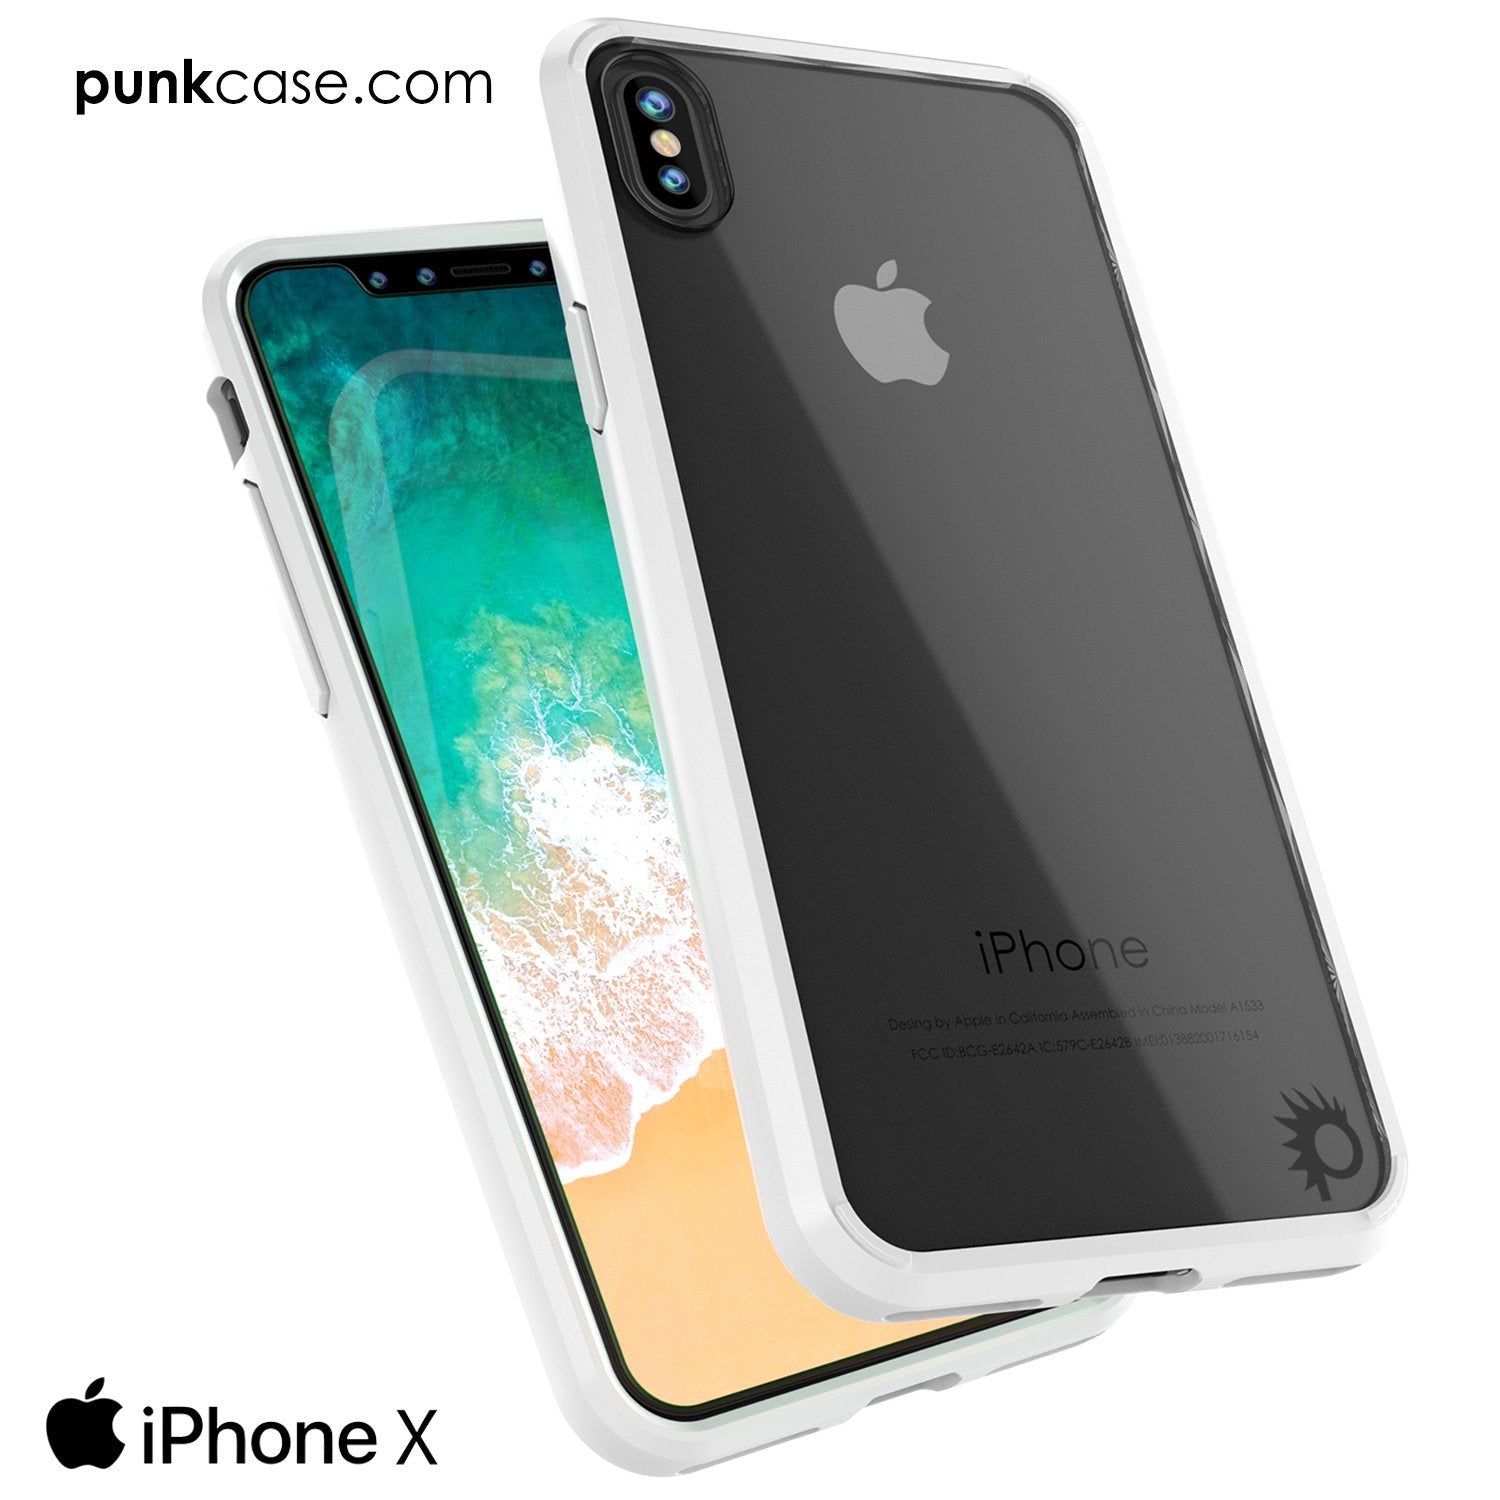 iPhone X Punkcase, LUCID 2.0 Series Slim Fit Dual Layer Cover, White